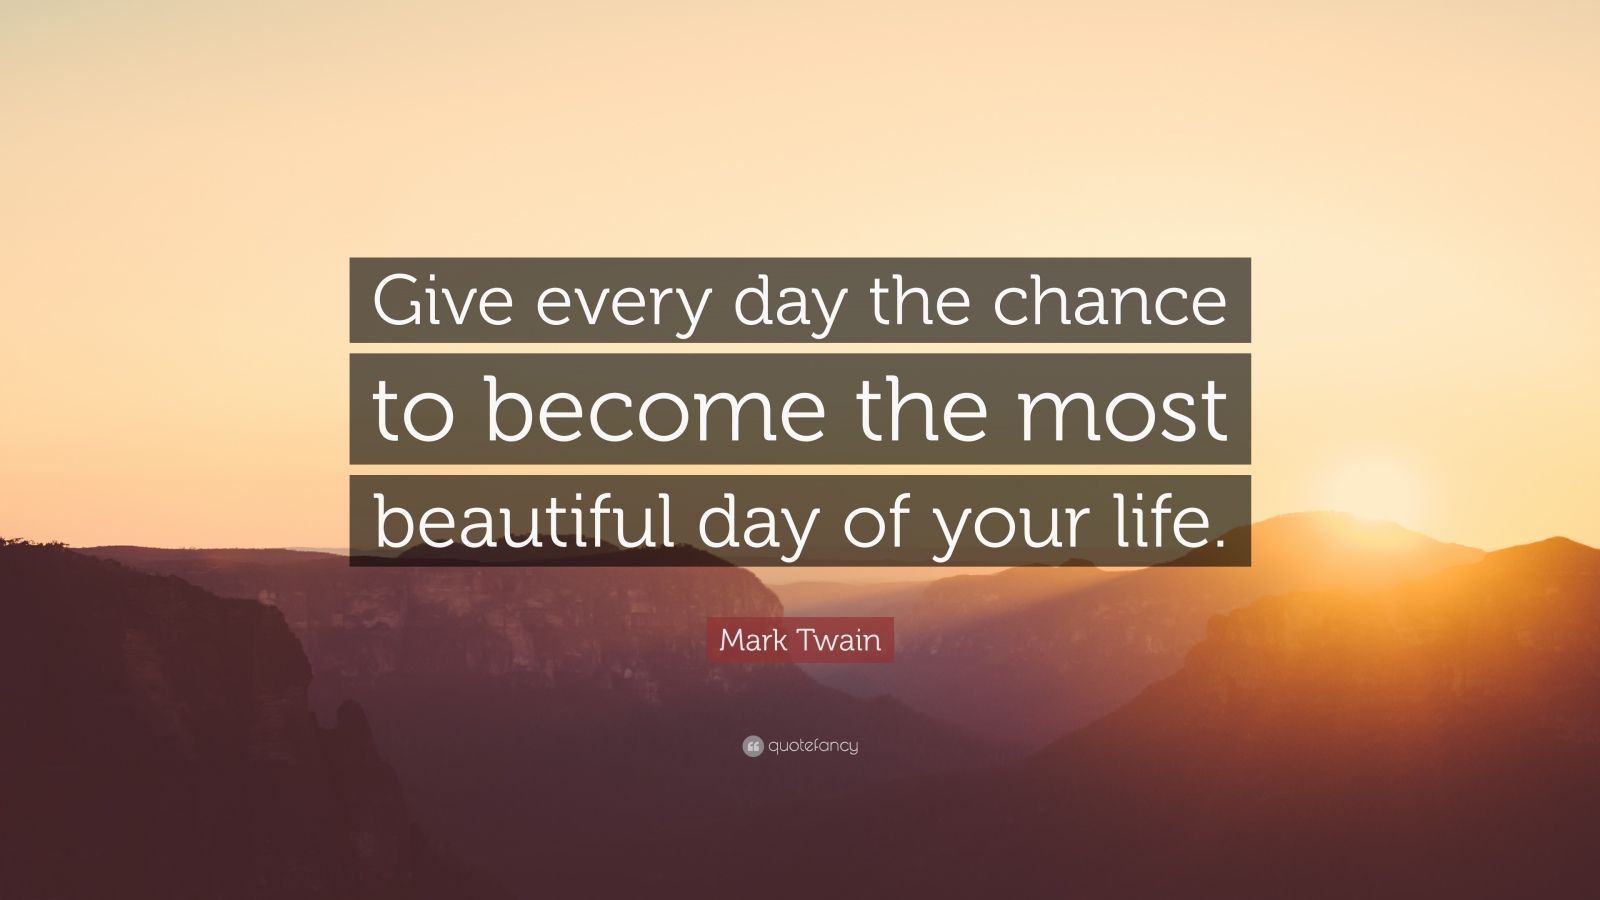 Mark Twain Quote: “Give every day the chance to become the most